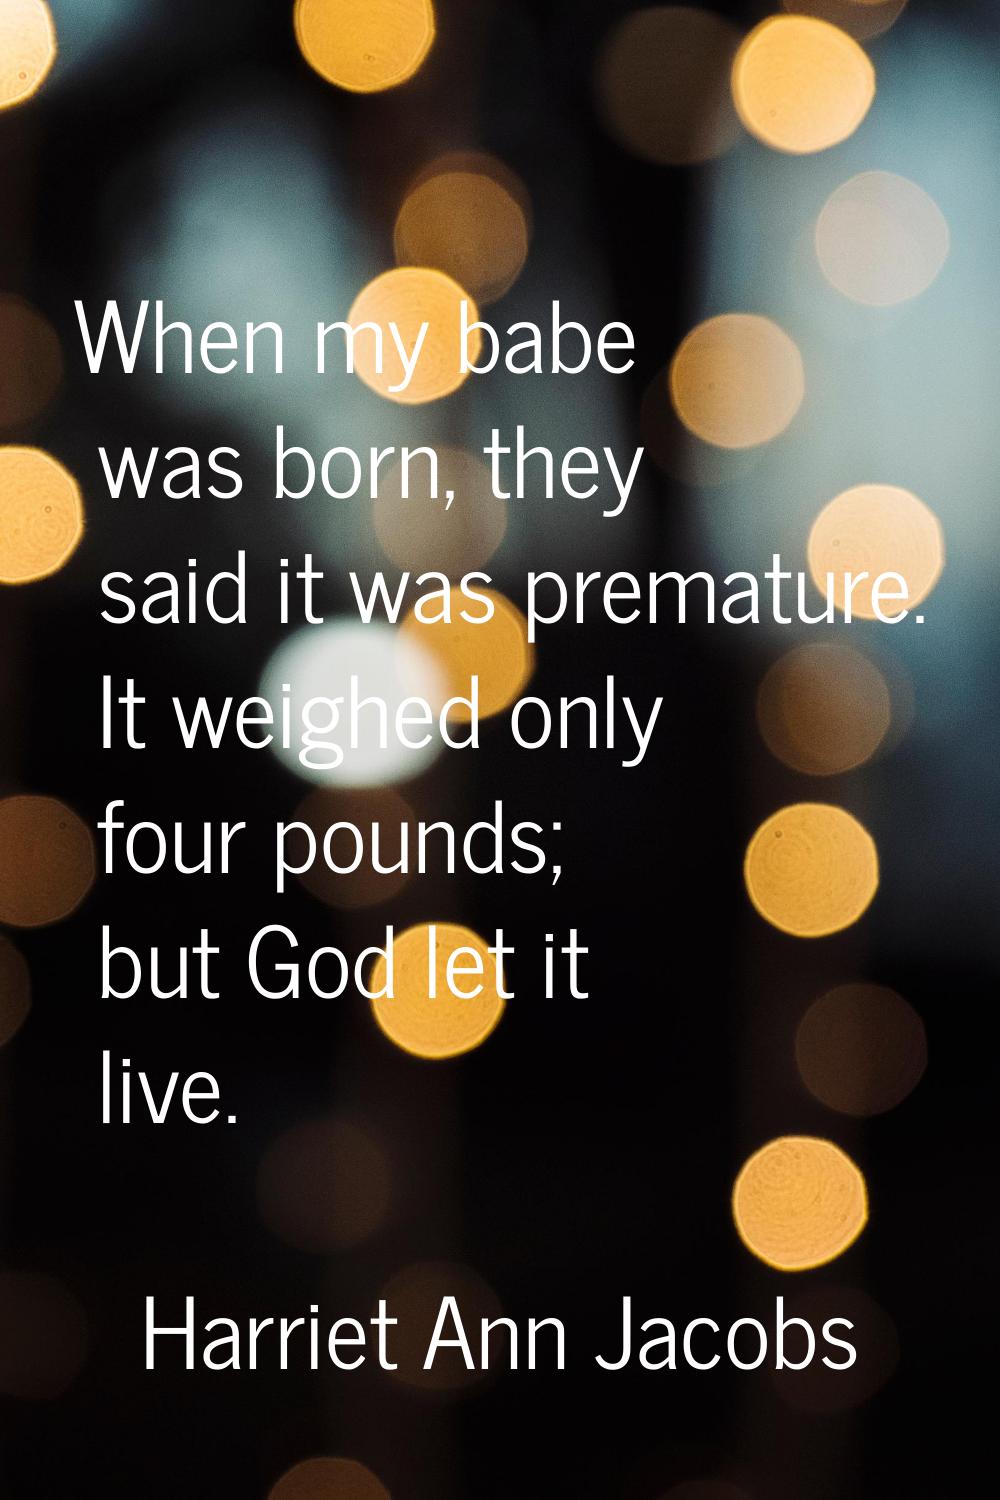 When my babe was born, they said it was premature. It weighed only four pounds; but God let it live